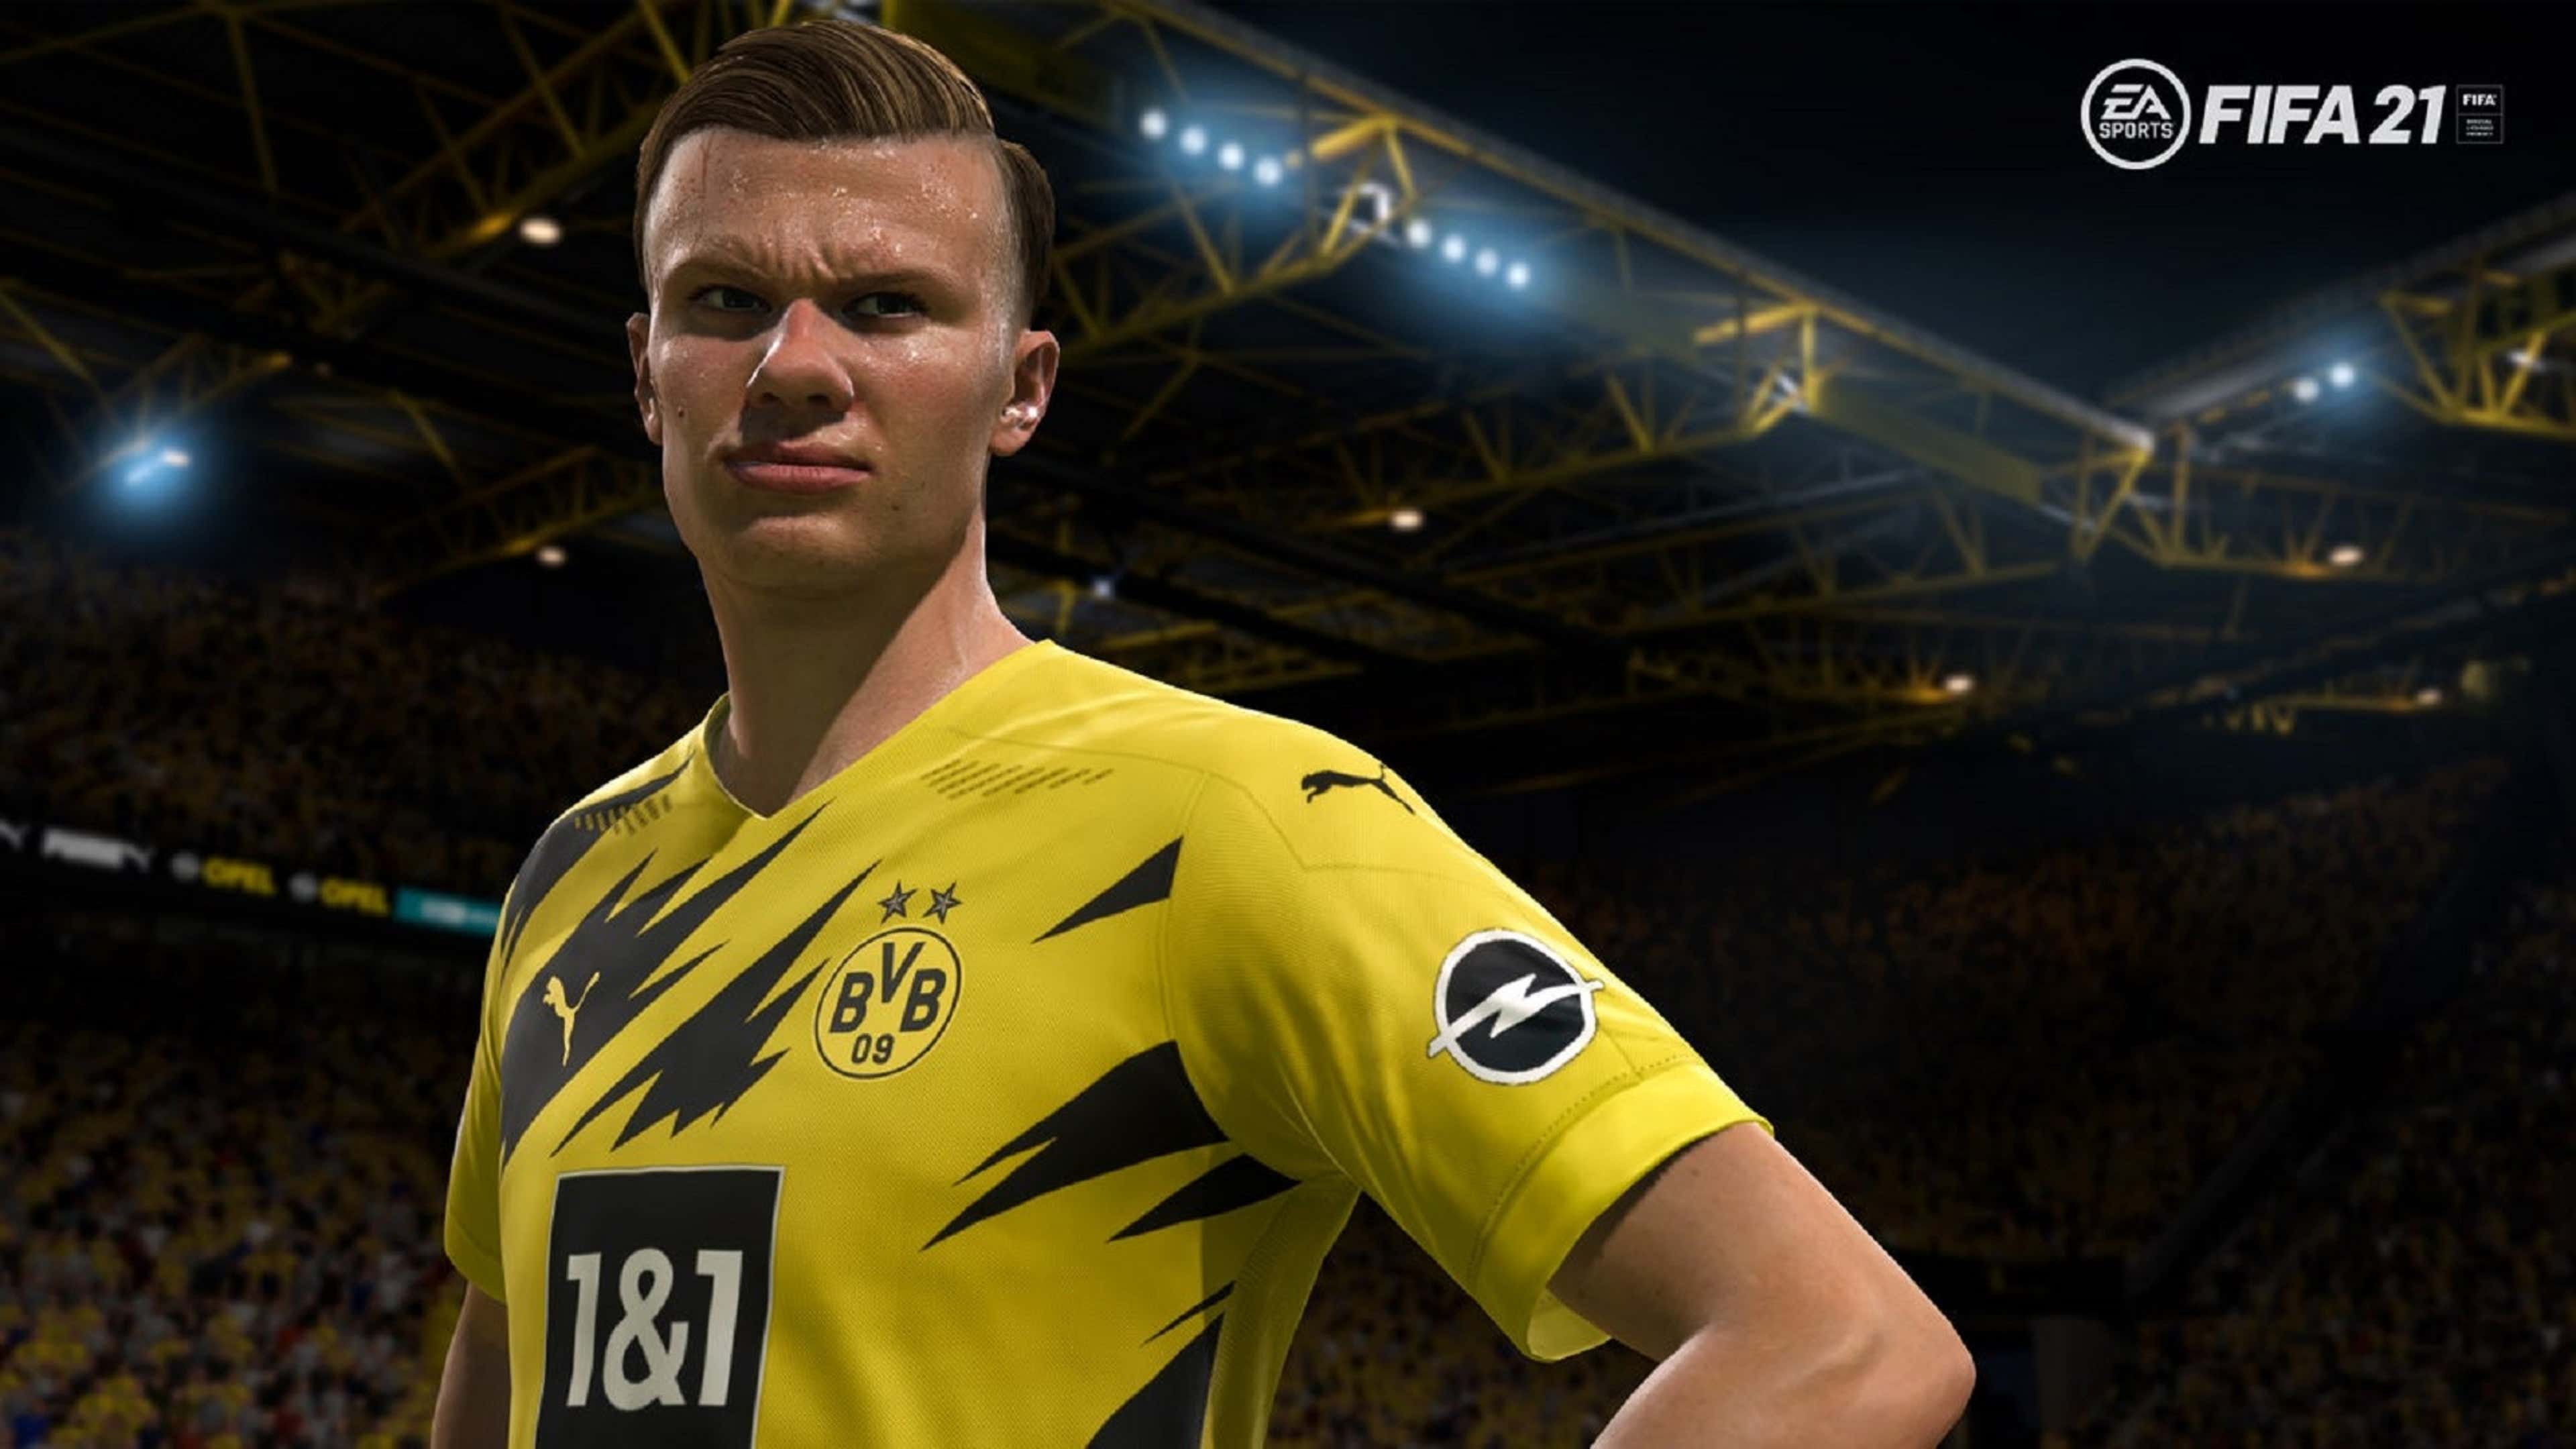 FIFA 22: Download size for PlayStation 5 revealed ahead of release